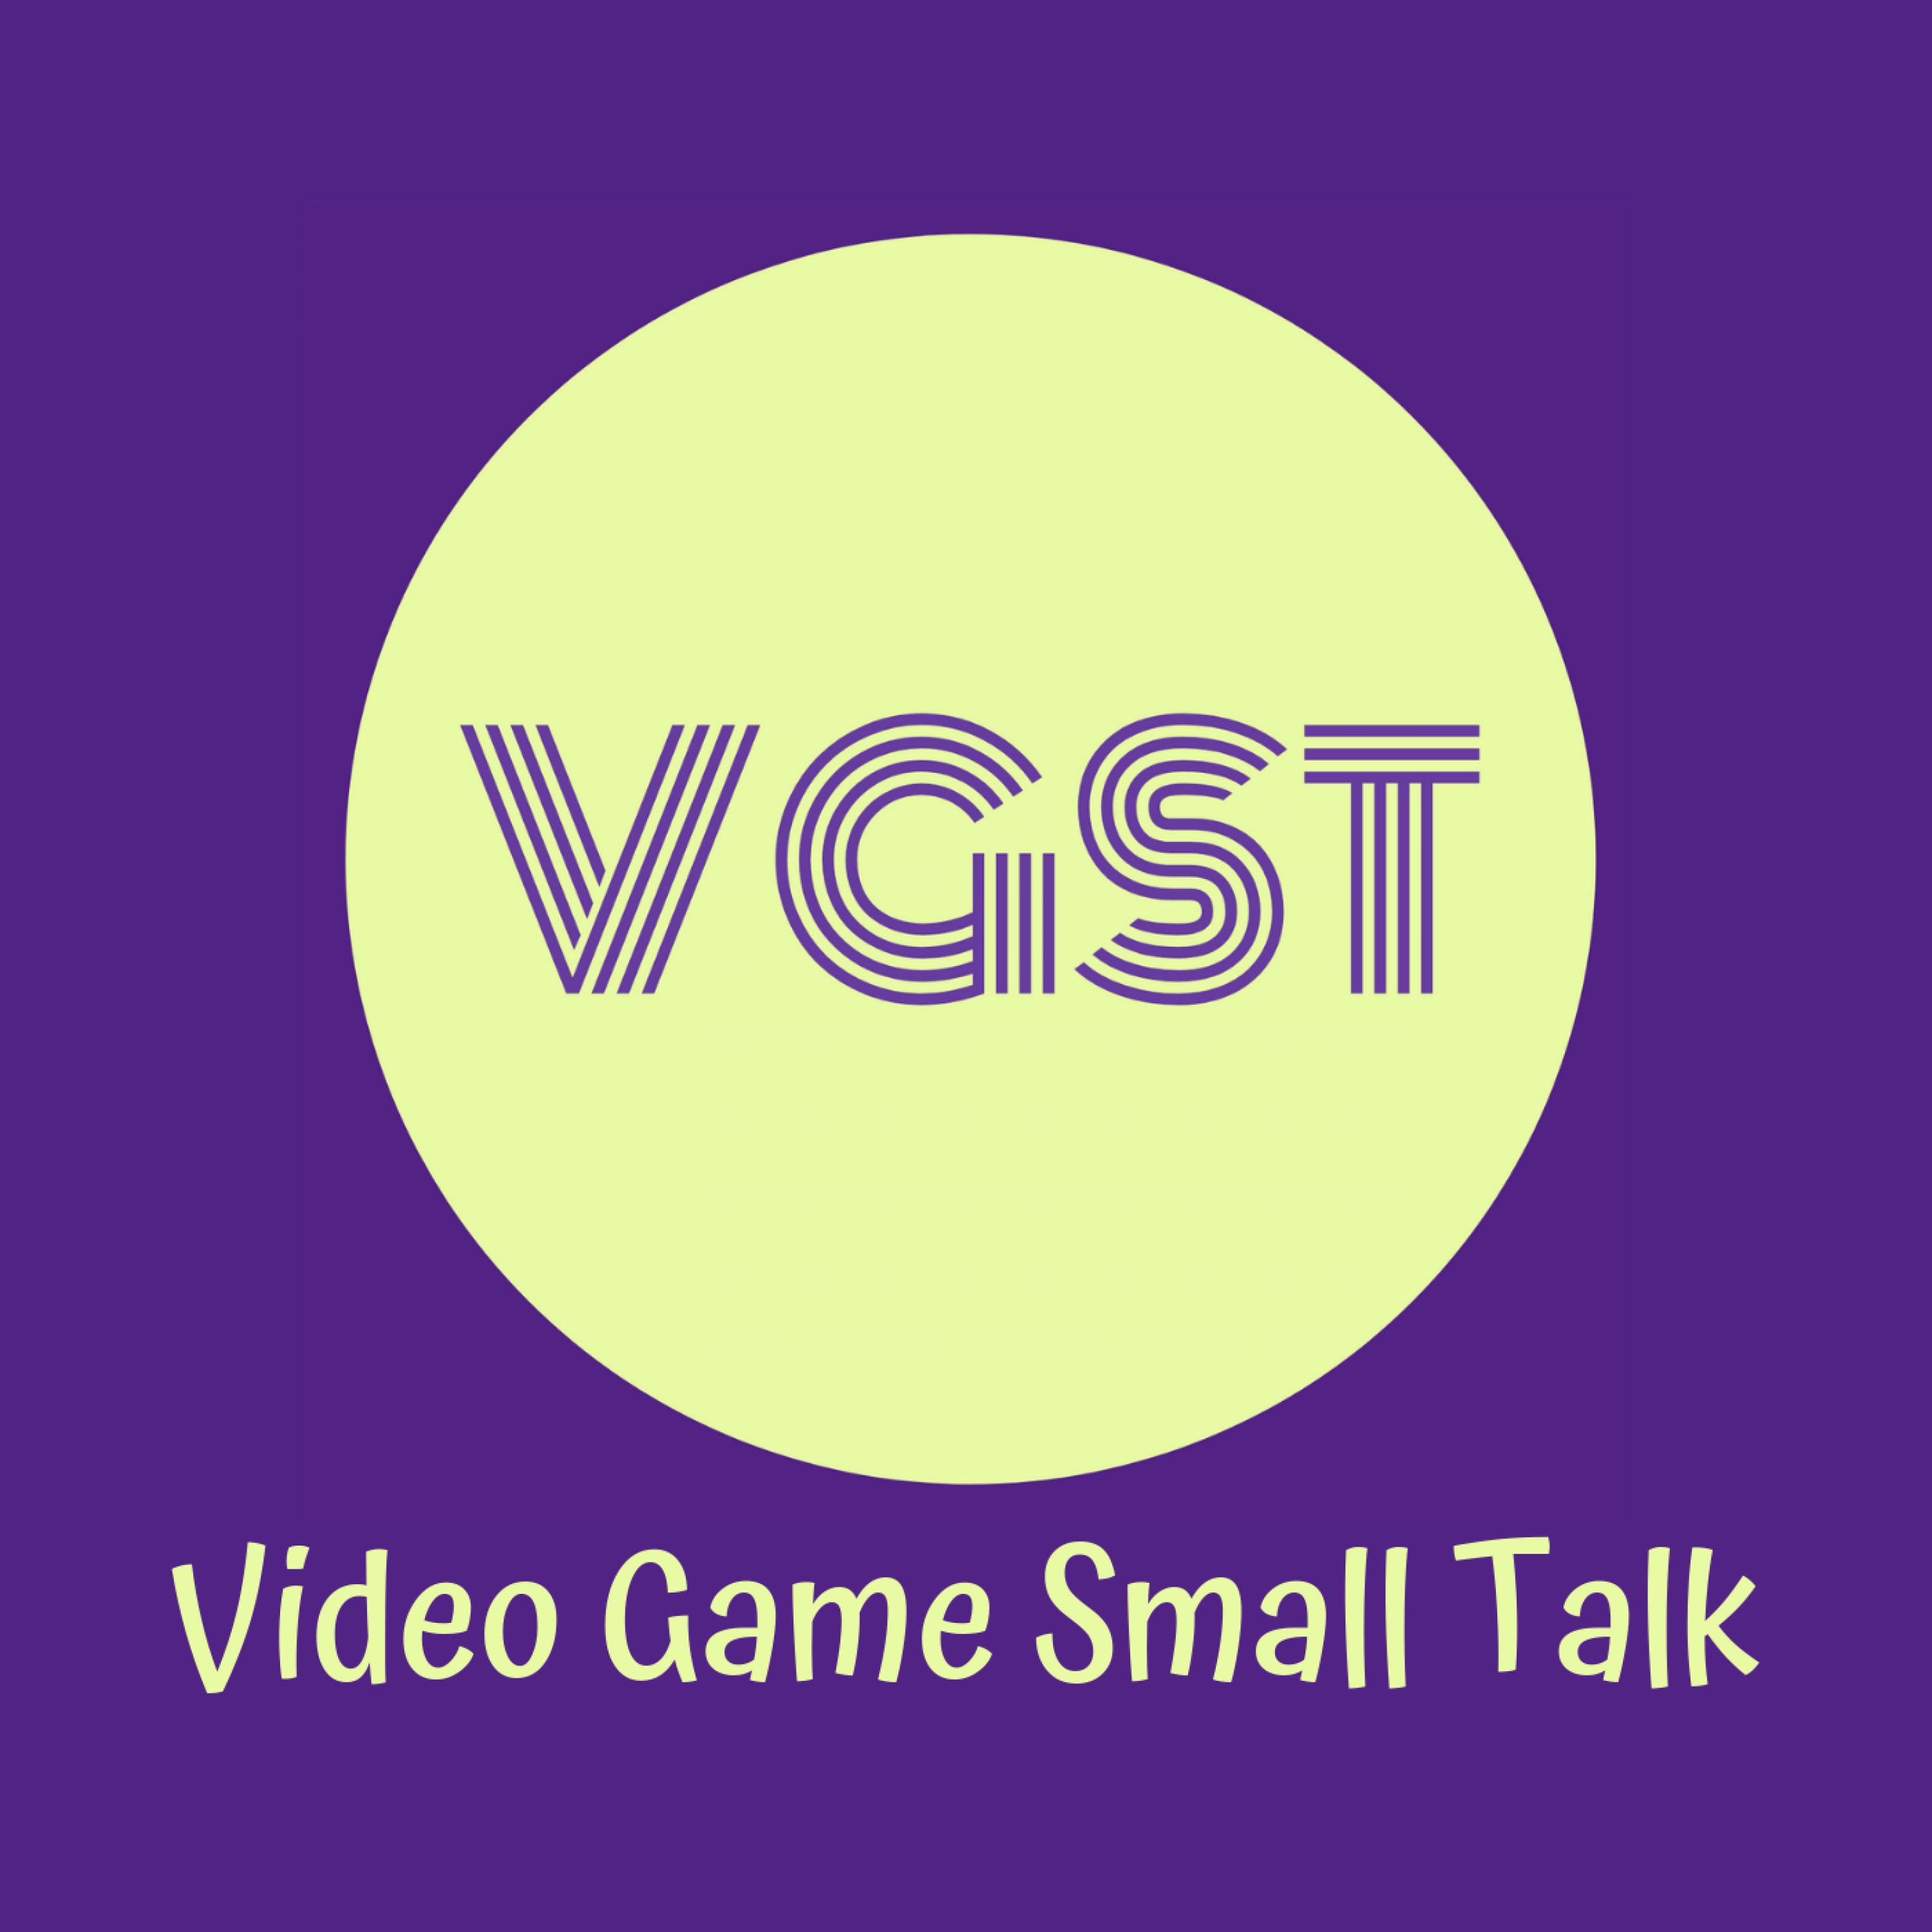 Video Game Small Talk - VGST